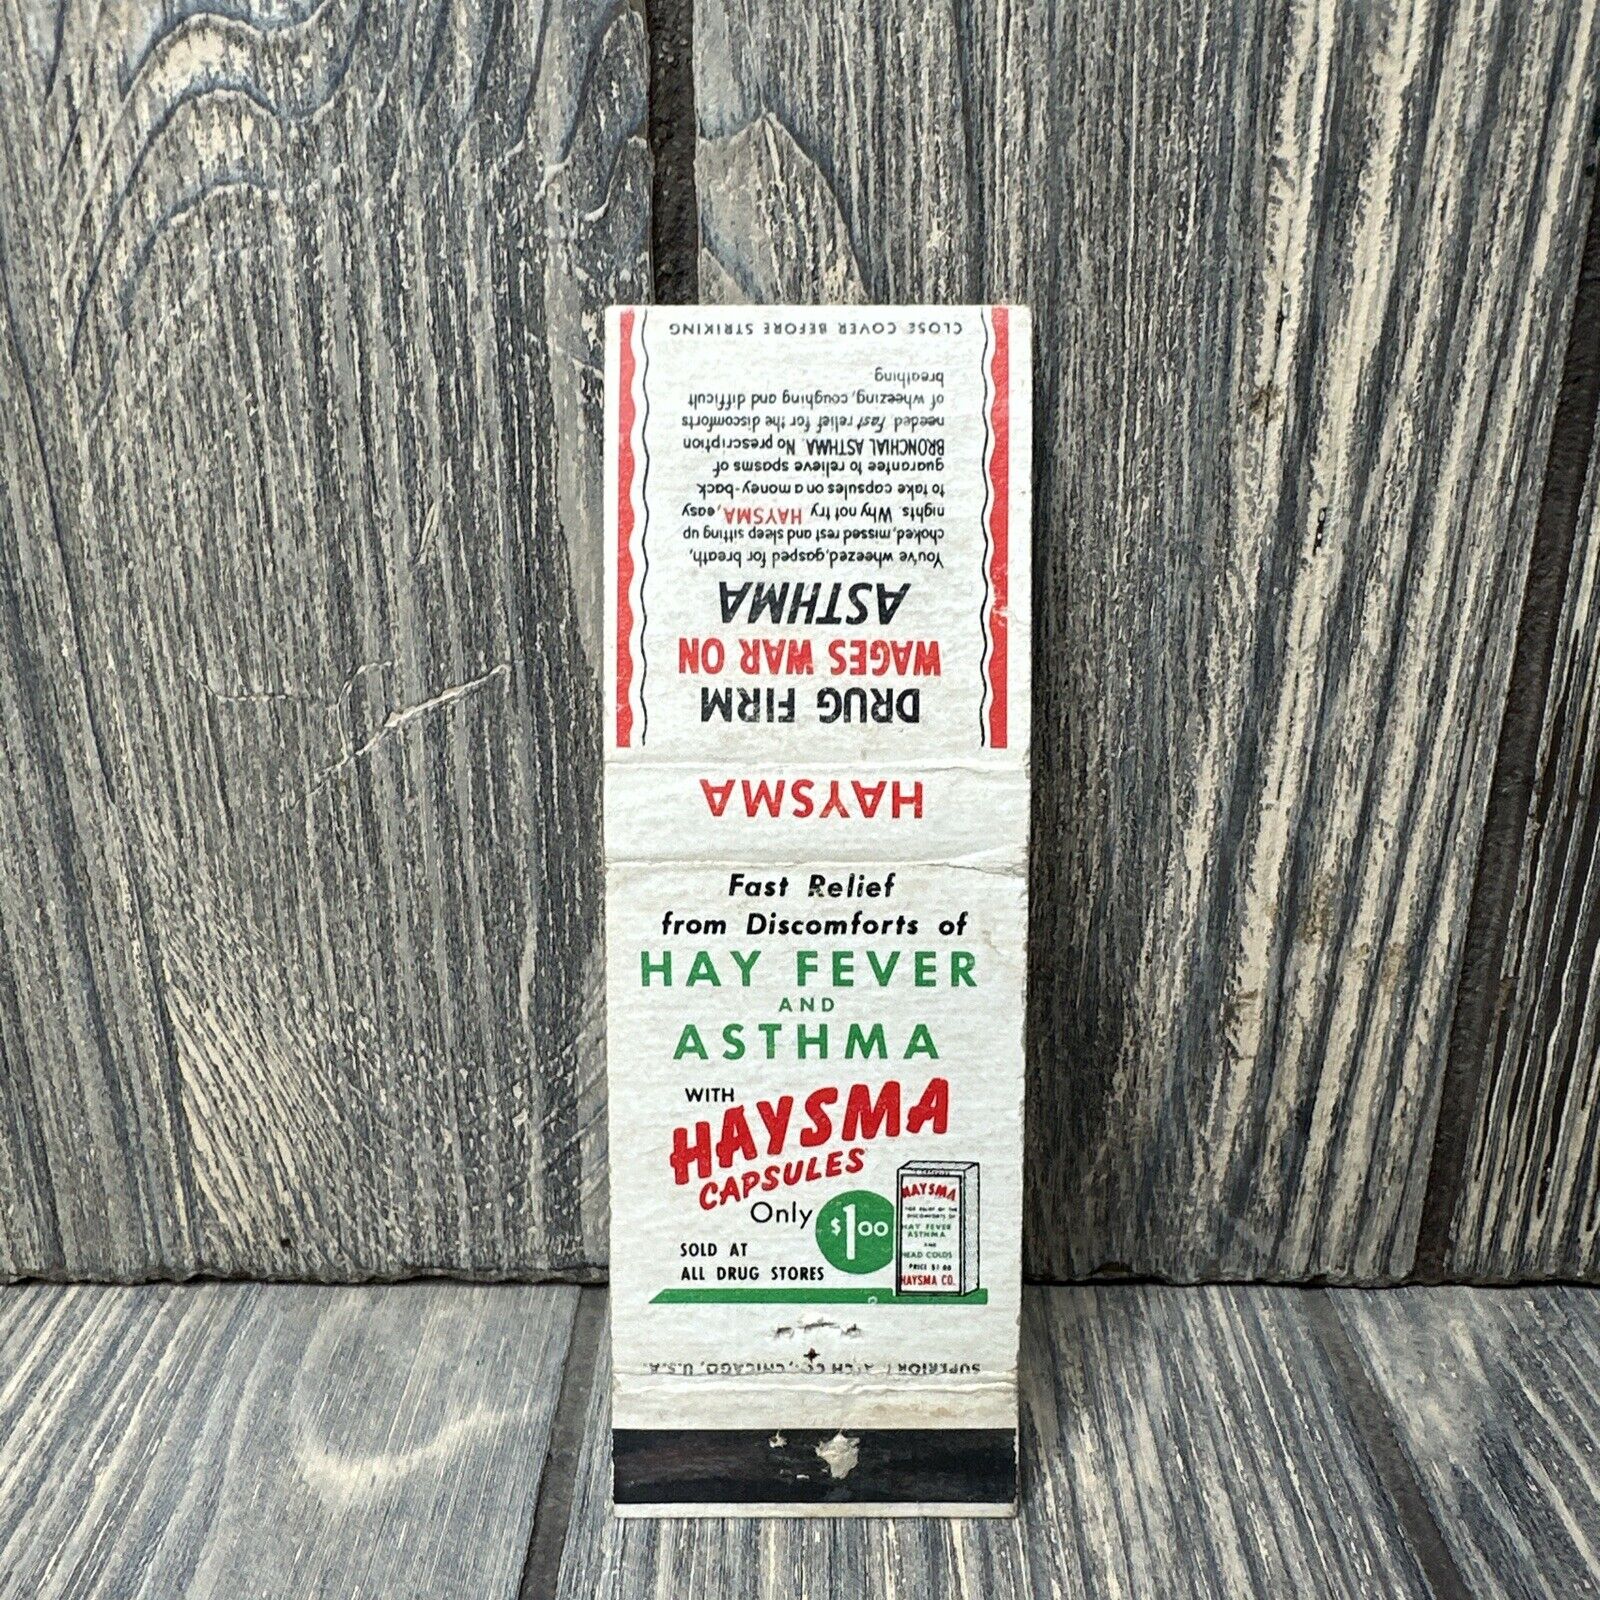 Vtg Haysma Capsules Hay Fever Asthma Matchbook Cover Advertisement